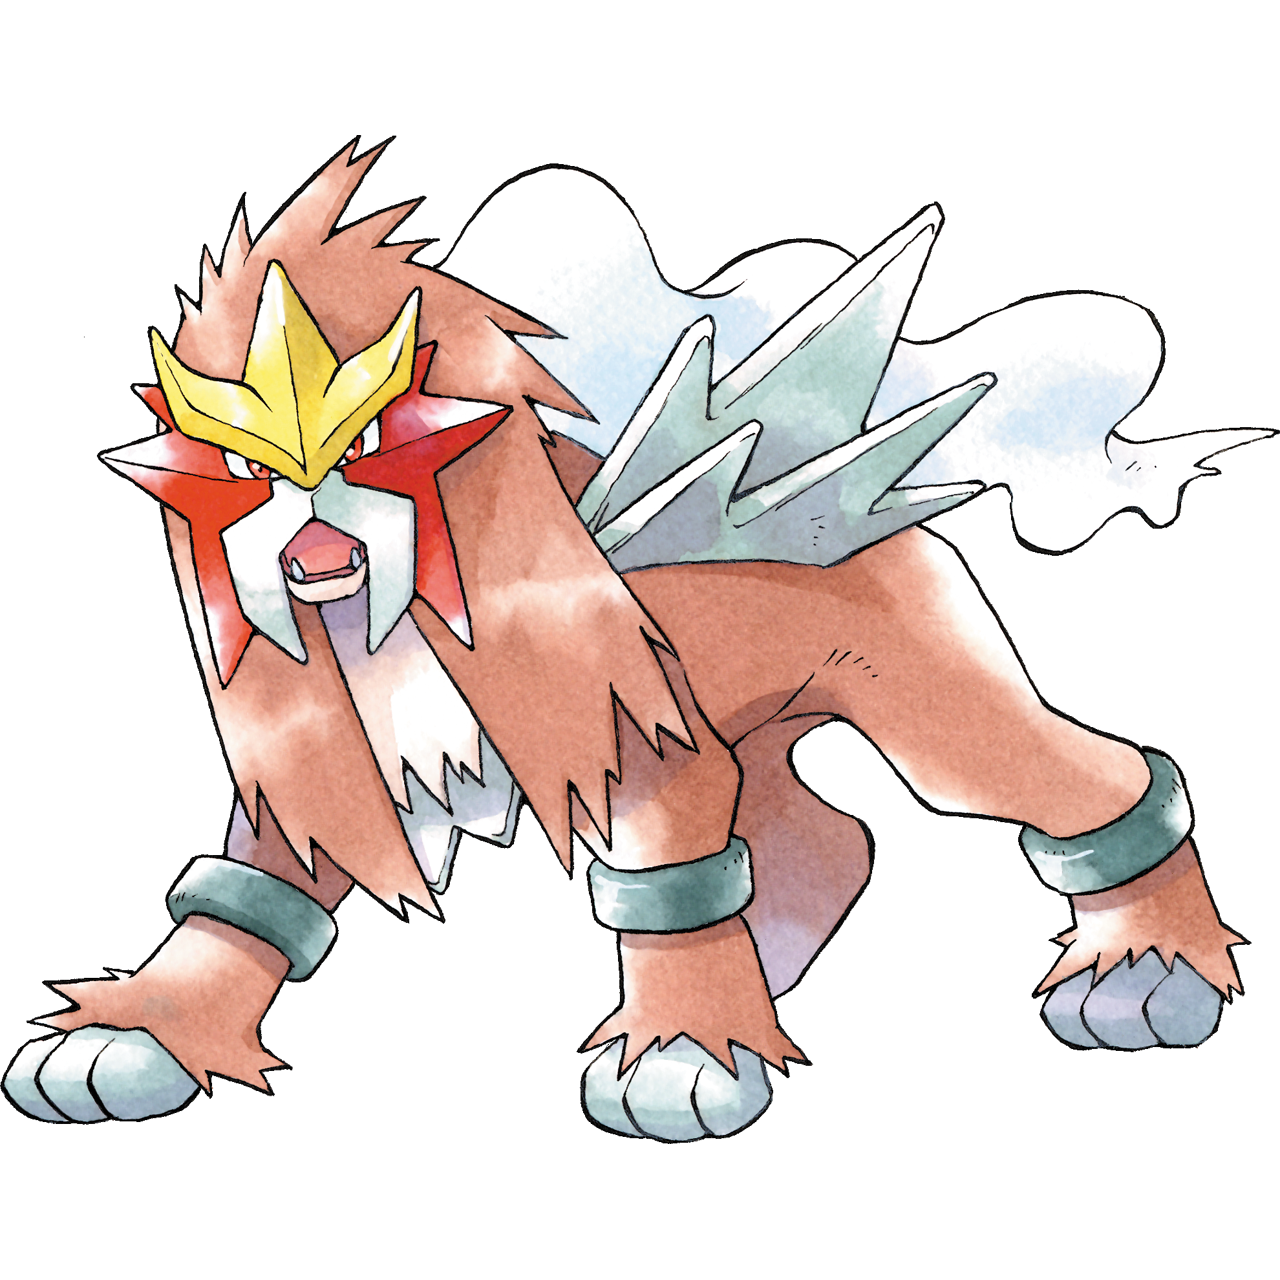 Entei. Resembling a stocky lion or a large dog, they have long brown fur, cream colored on their chest. They have a smoke-like mane down their back, spiky grey ridges rise on either side of the mane. The crest on their face has yellow spikes curved upwards, red spikes on either side, and two grey spikes framing the mouth.